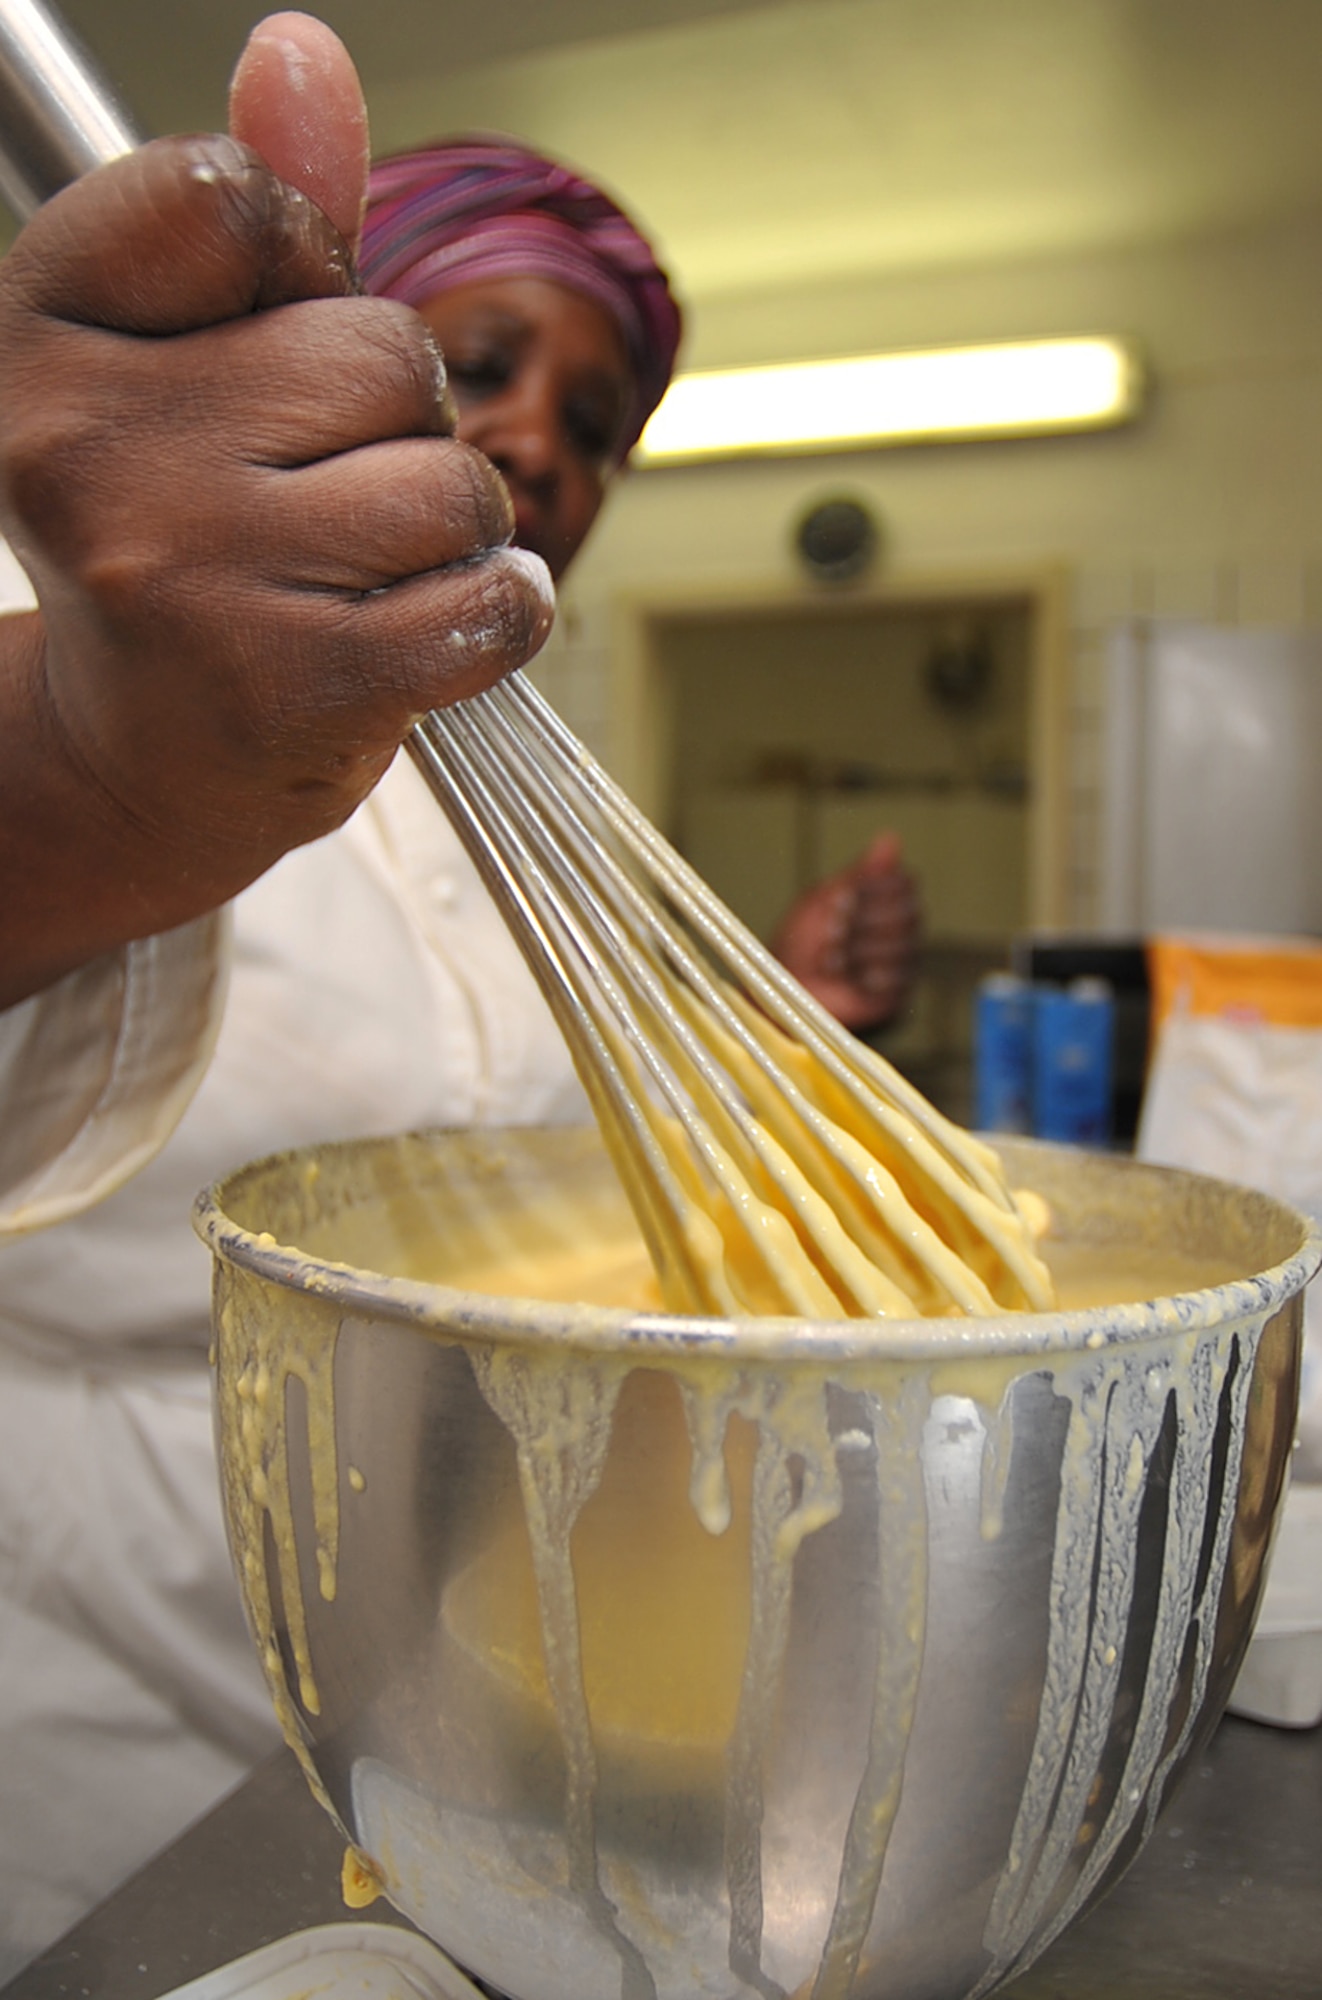 Brenda 'Mama' West, professional chef, mixes a cornbread batter in the kitchen of her restaurant, Ramstein village, Germany, Feb. 25, 2010. Mama West has been volunteering her time and cooking skills to feed U.S. servicemembers and wounded warriors in the KMC for over a decade. (U.S. Air Force photo by Senior Airman Tony R. Ritter) 